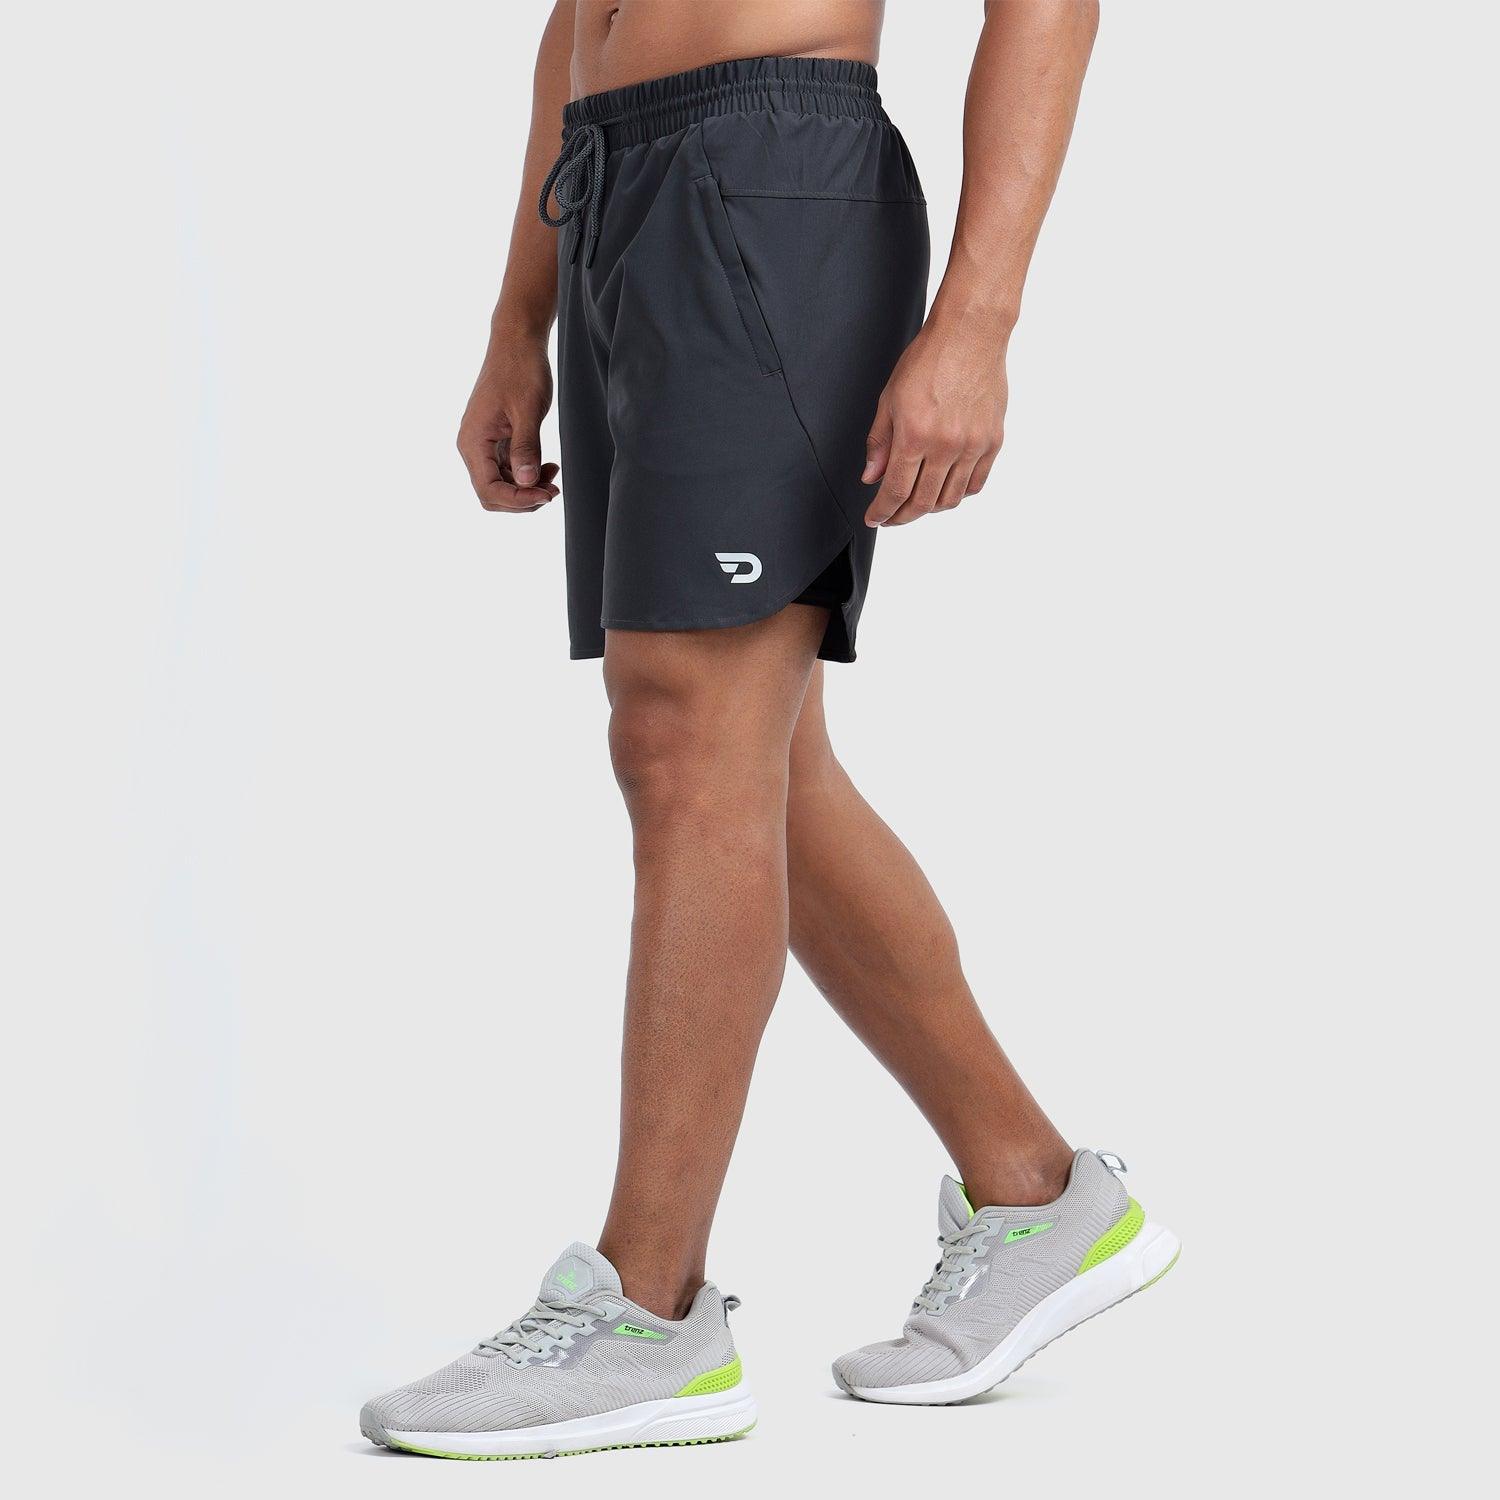 Denmonk's fashionable 2-IN-1 SHORTS charcoal shorts for men will boost your level of gym fitness.